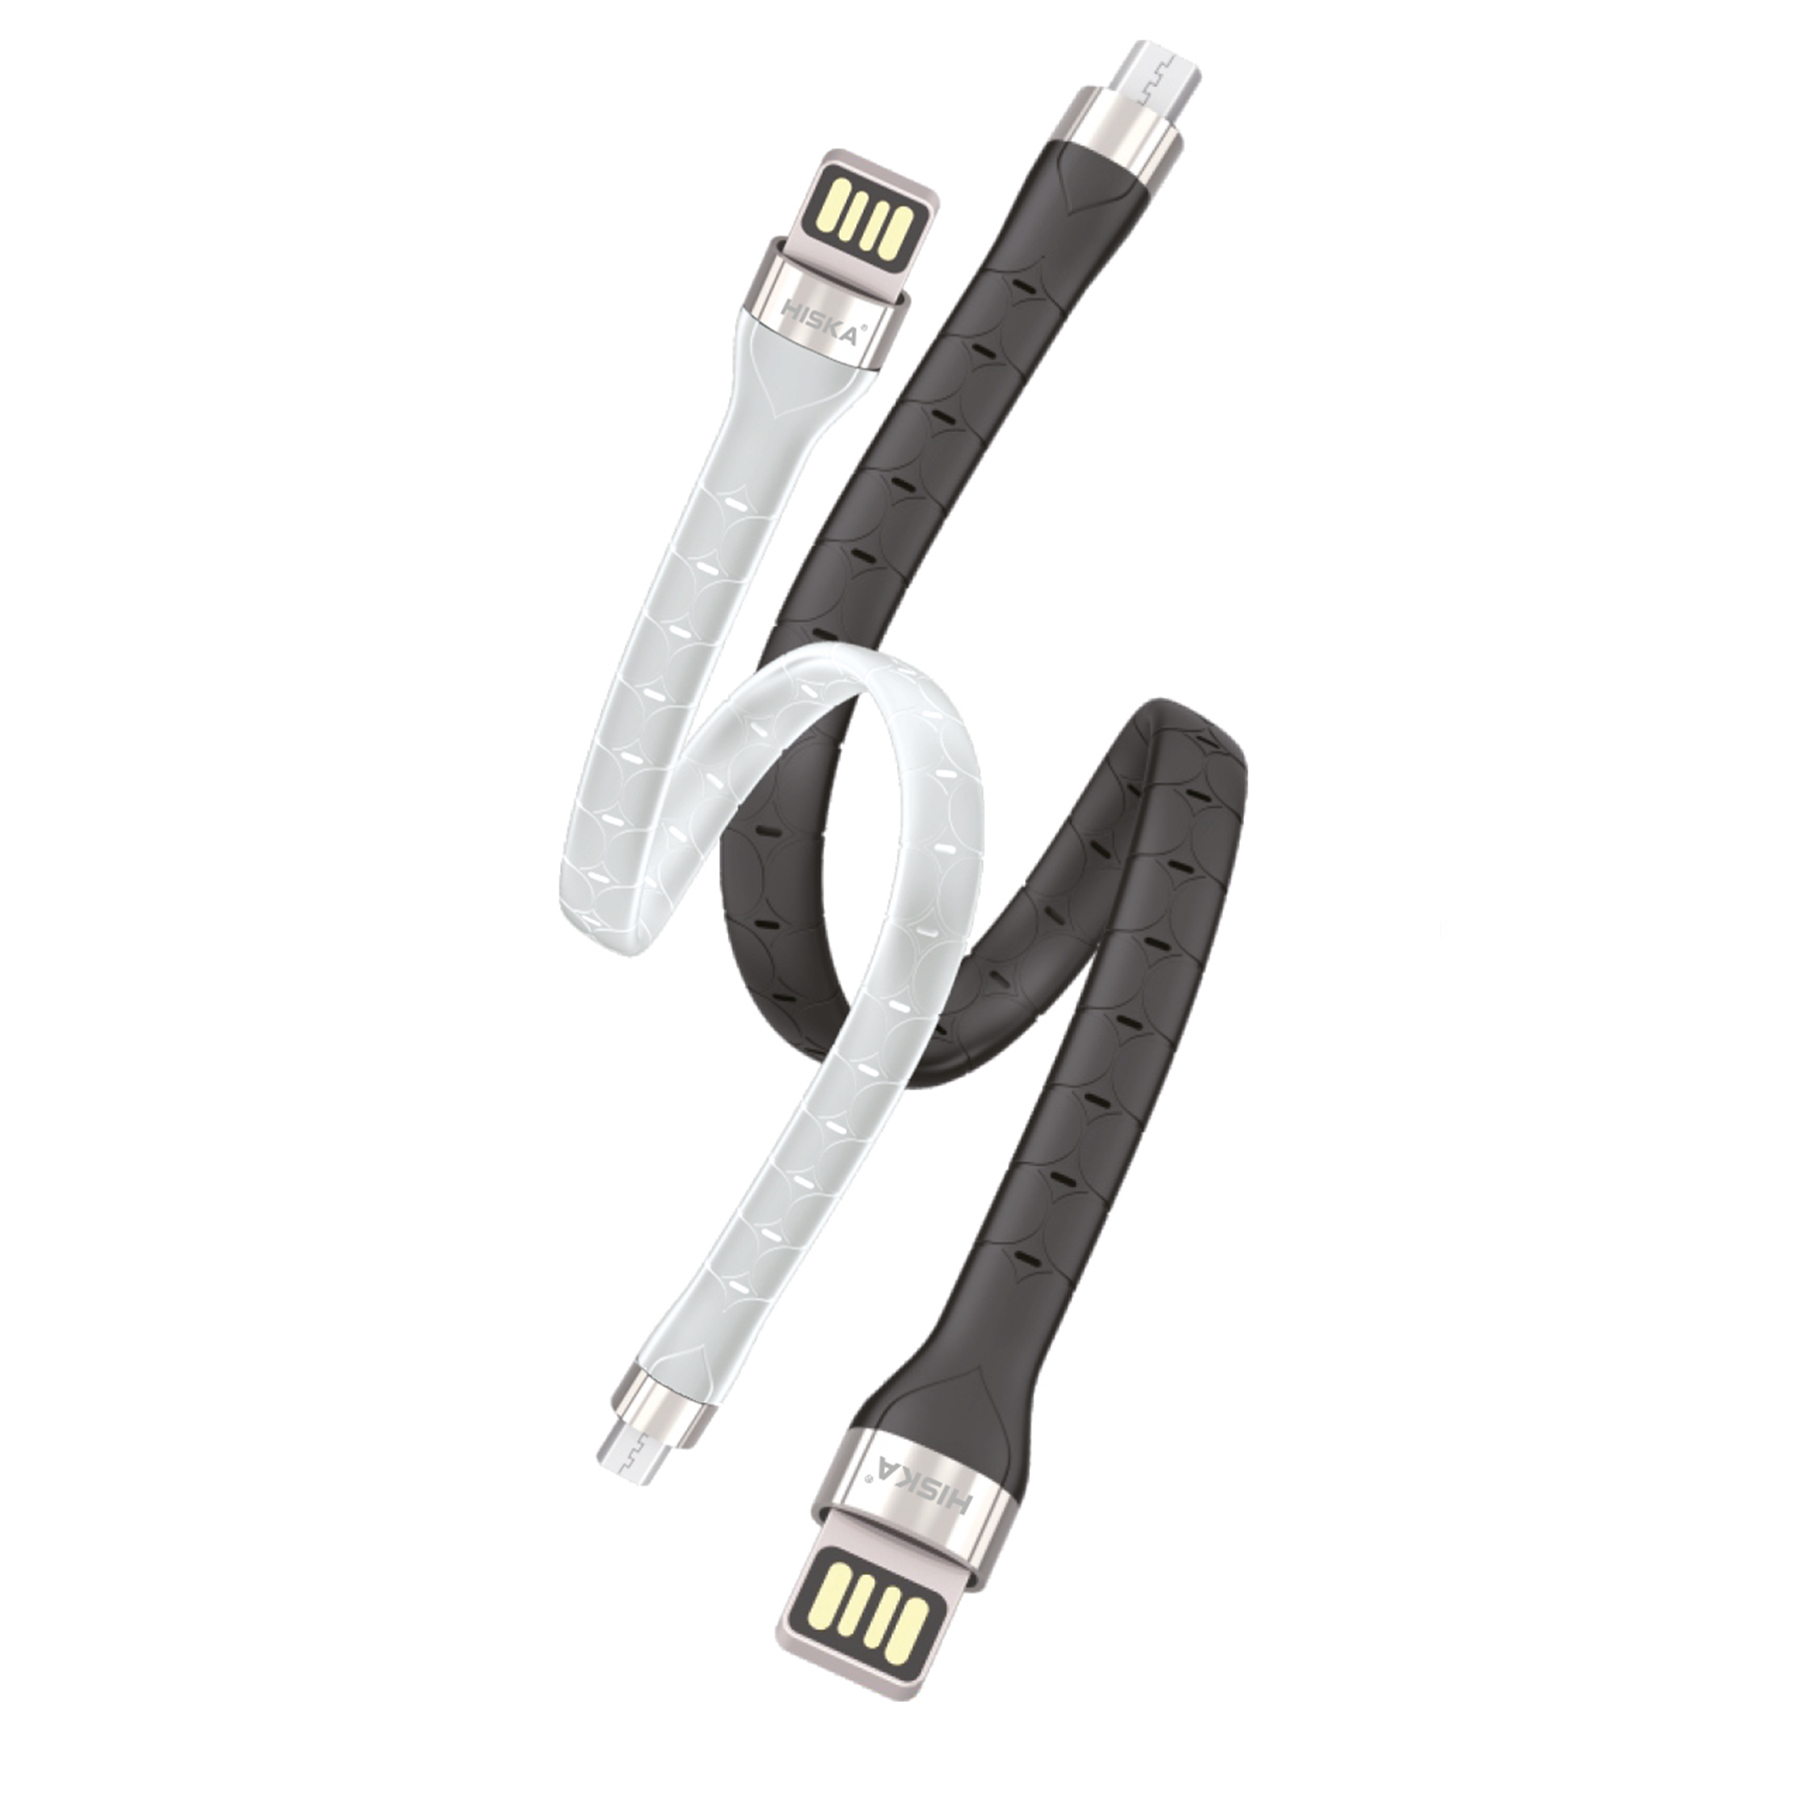 GHR-04 Charging cable LX1015